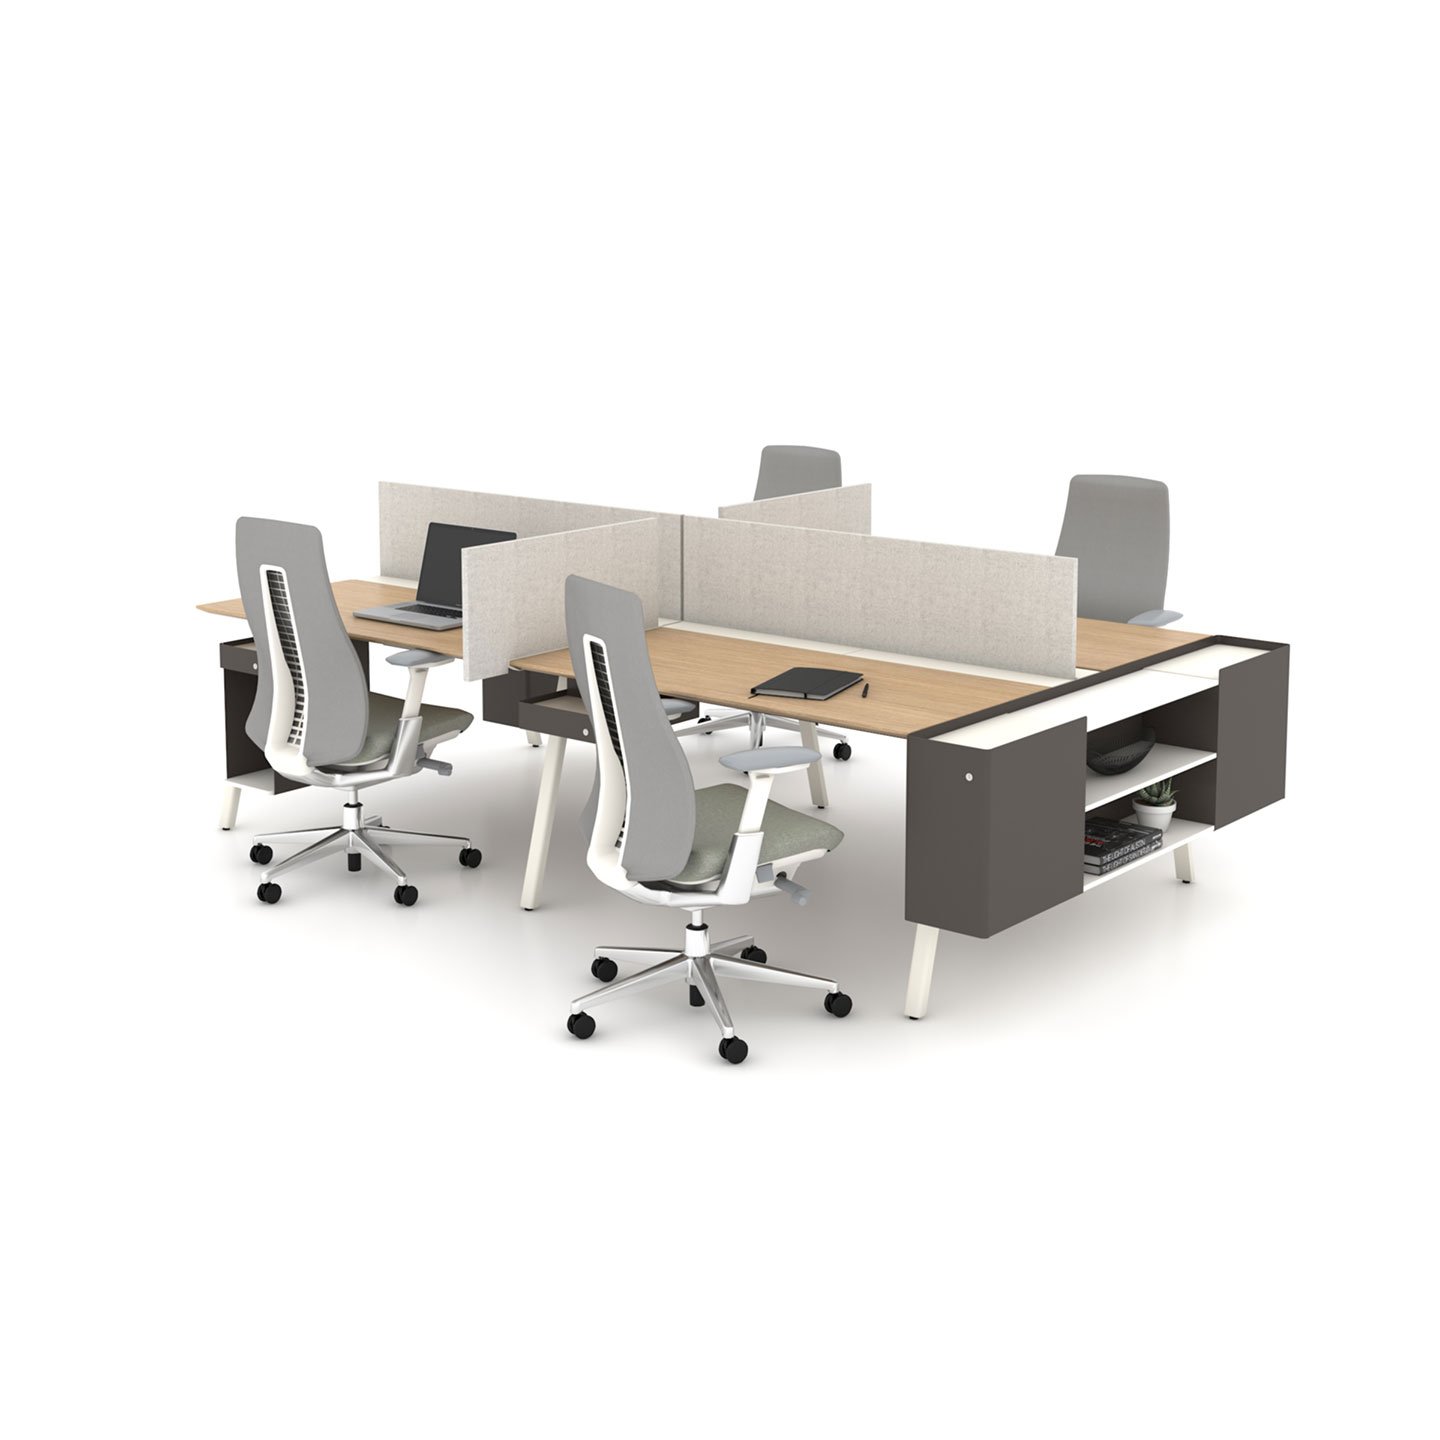 Haworth Intuity Workspace divider in peca color in an office desk mock up with fern chairs